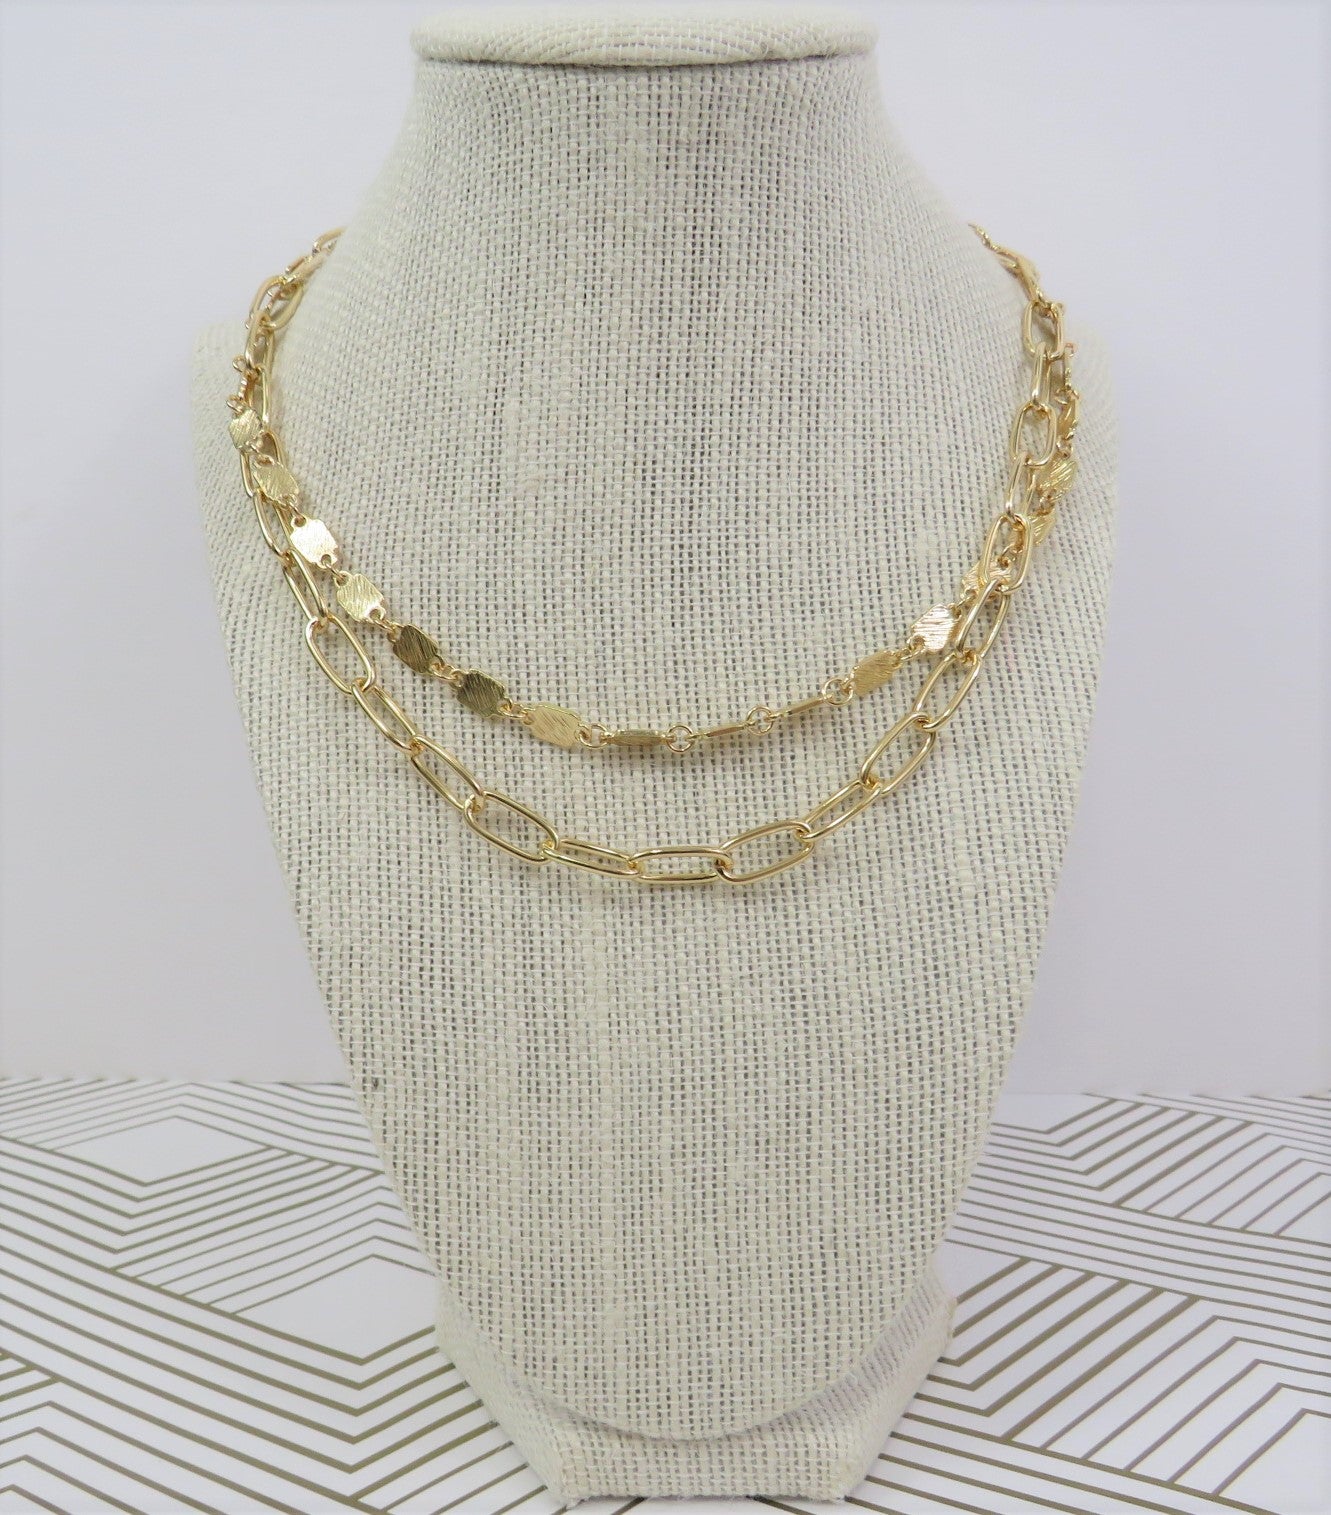 Double layer gold necklace with 2 styles of chains on a gray, tan and gold decorated background